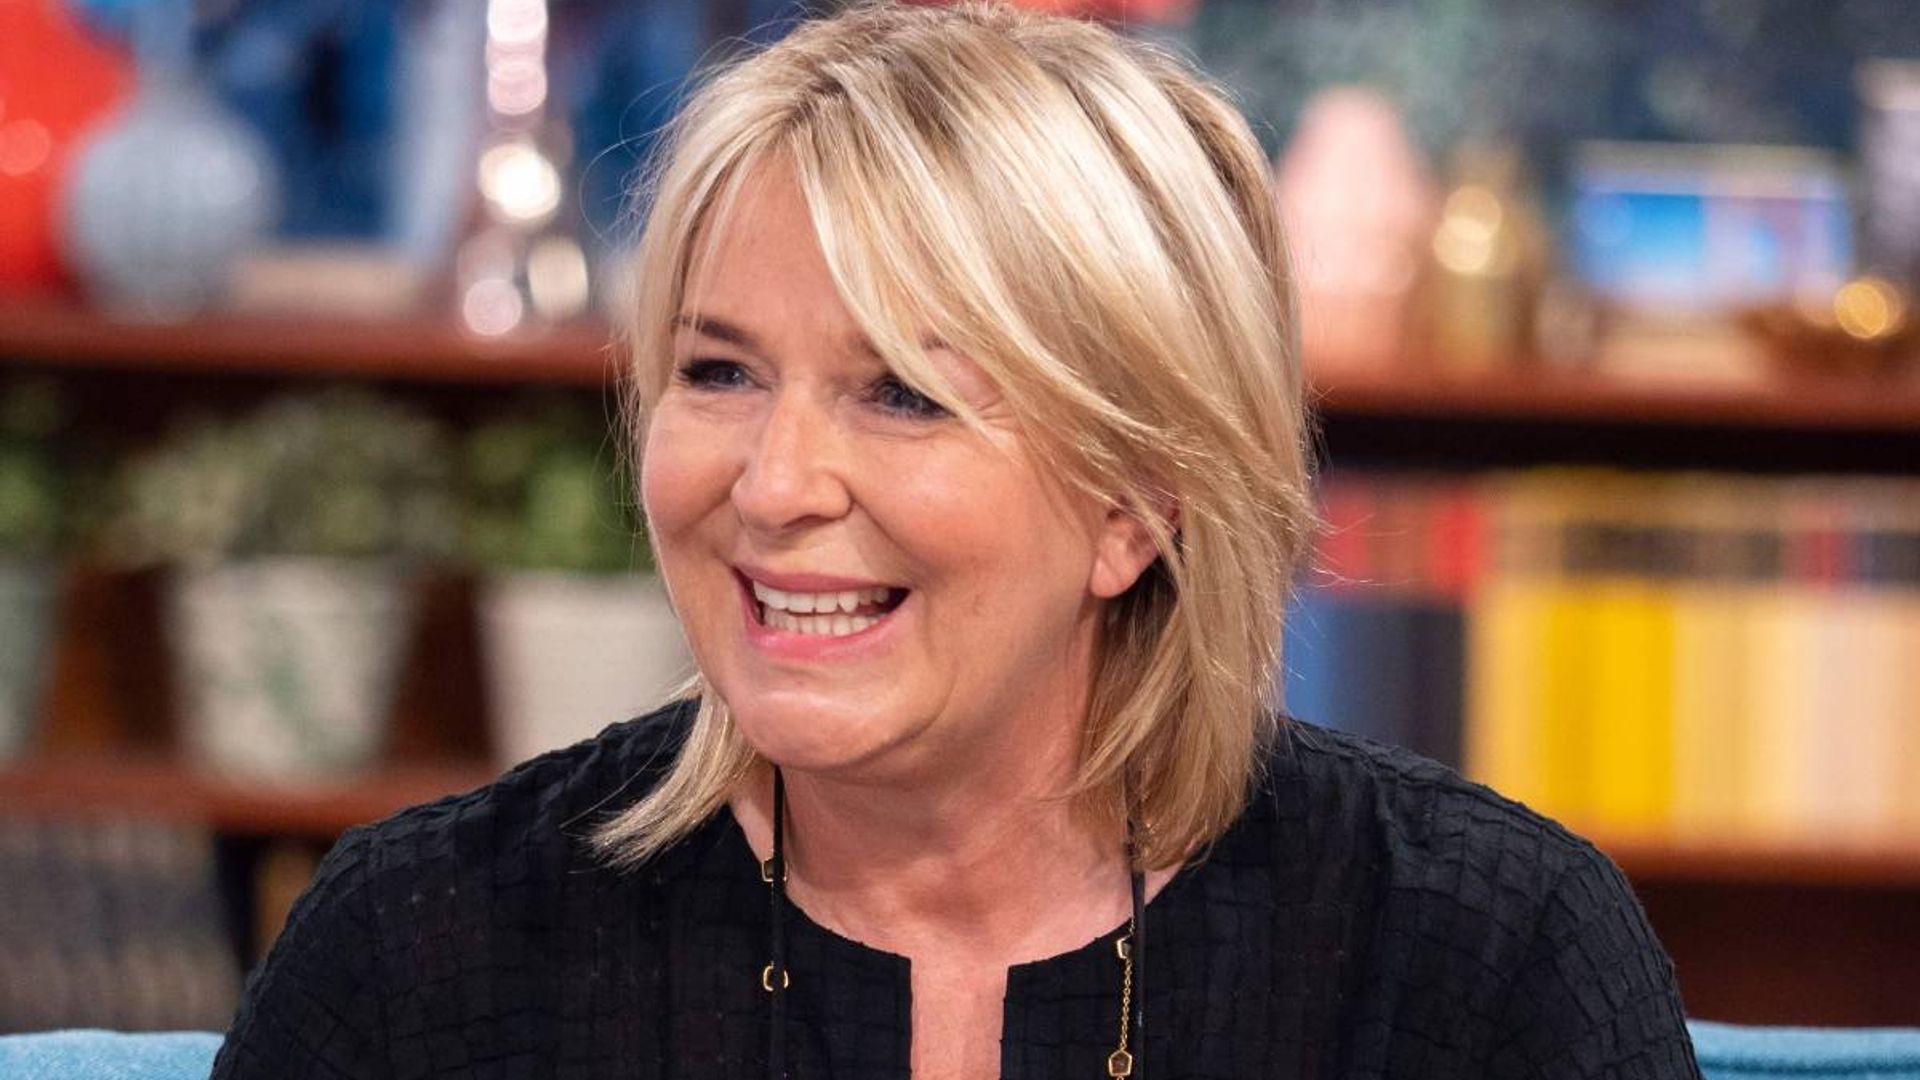 Fern Britton looks happy and radiant in new photo during her time in Cornwall